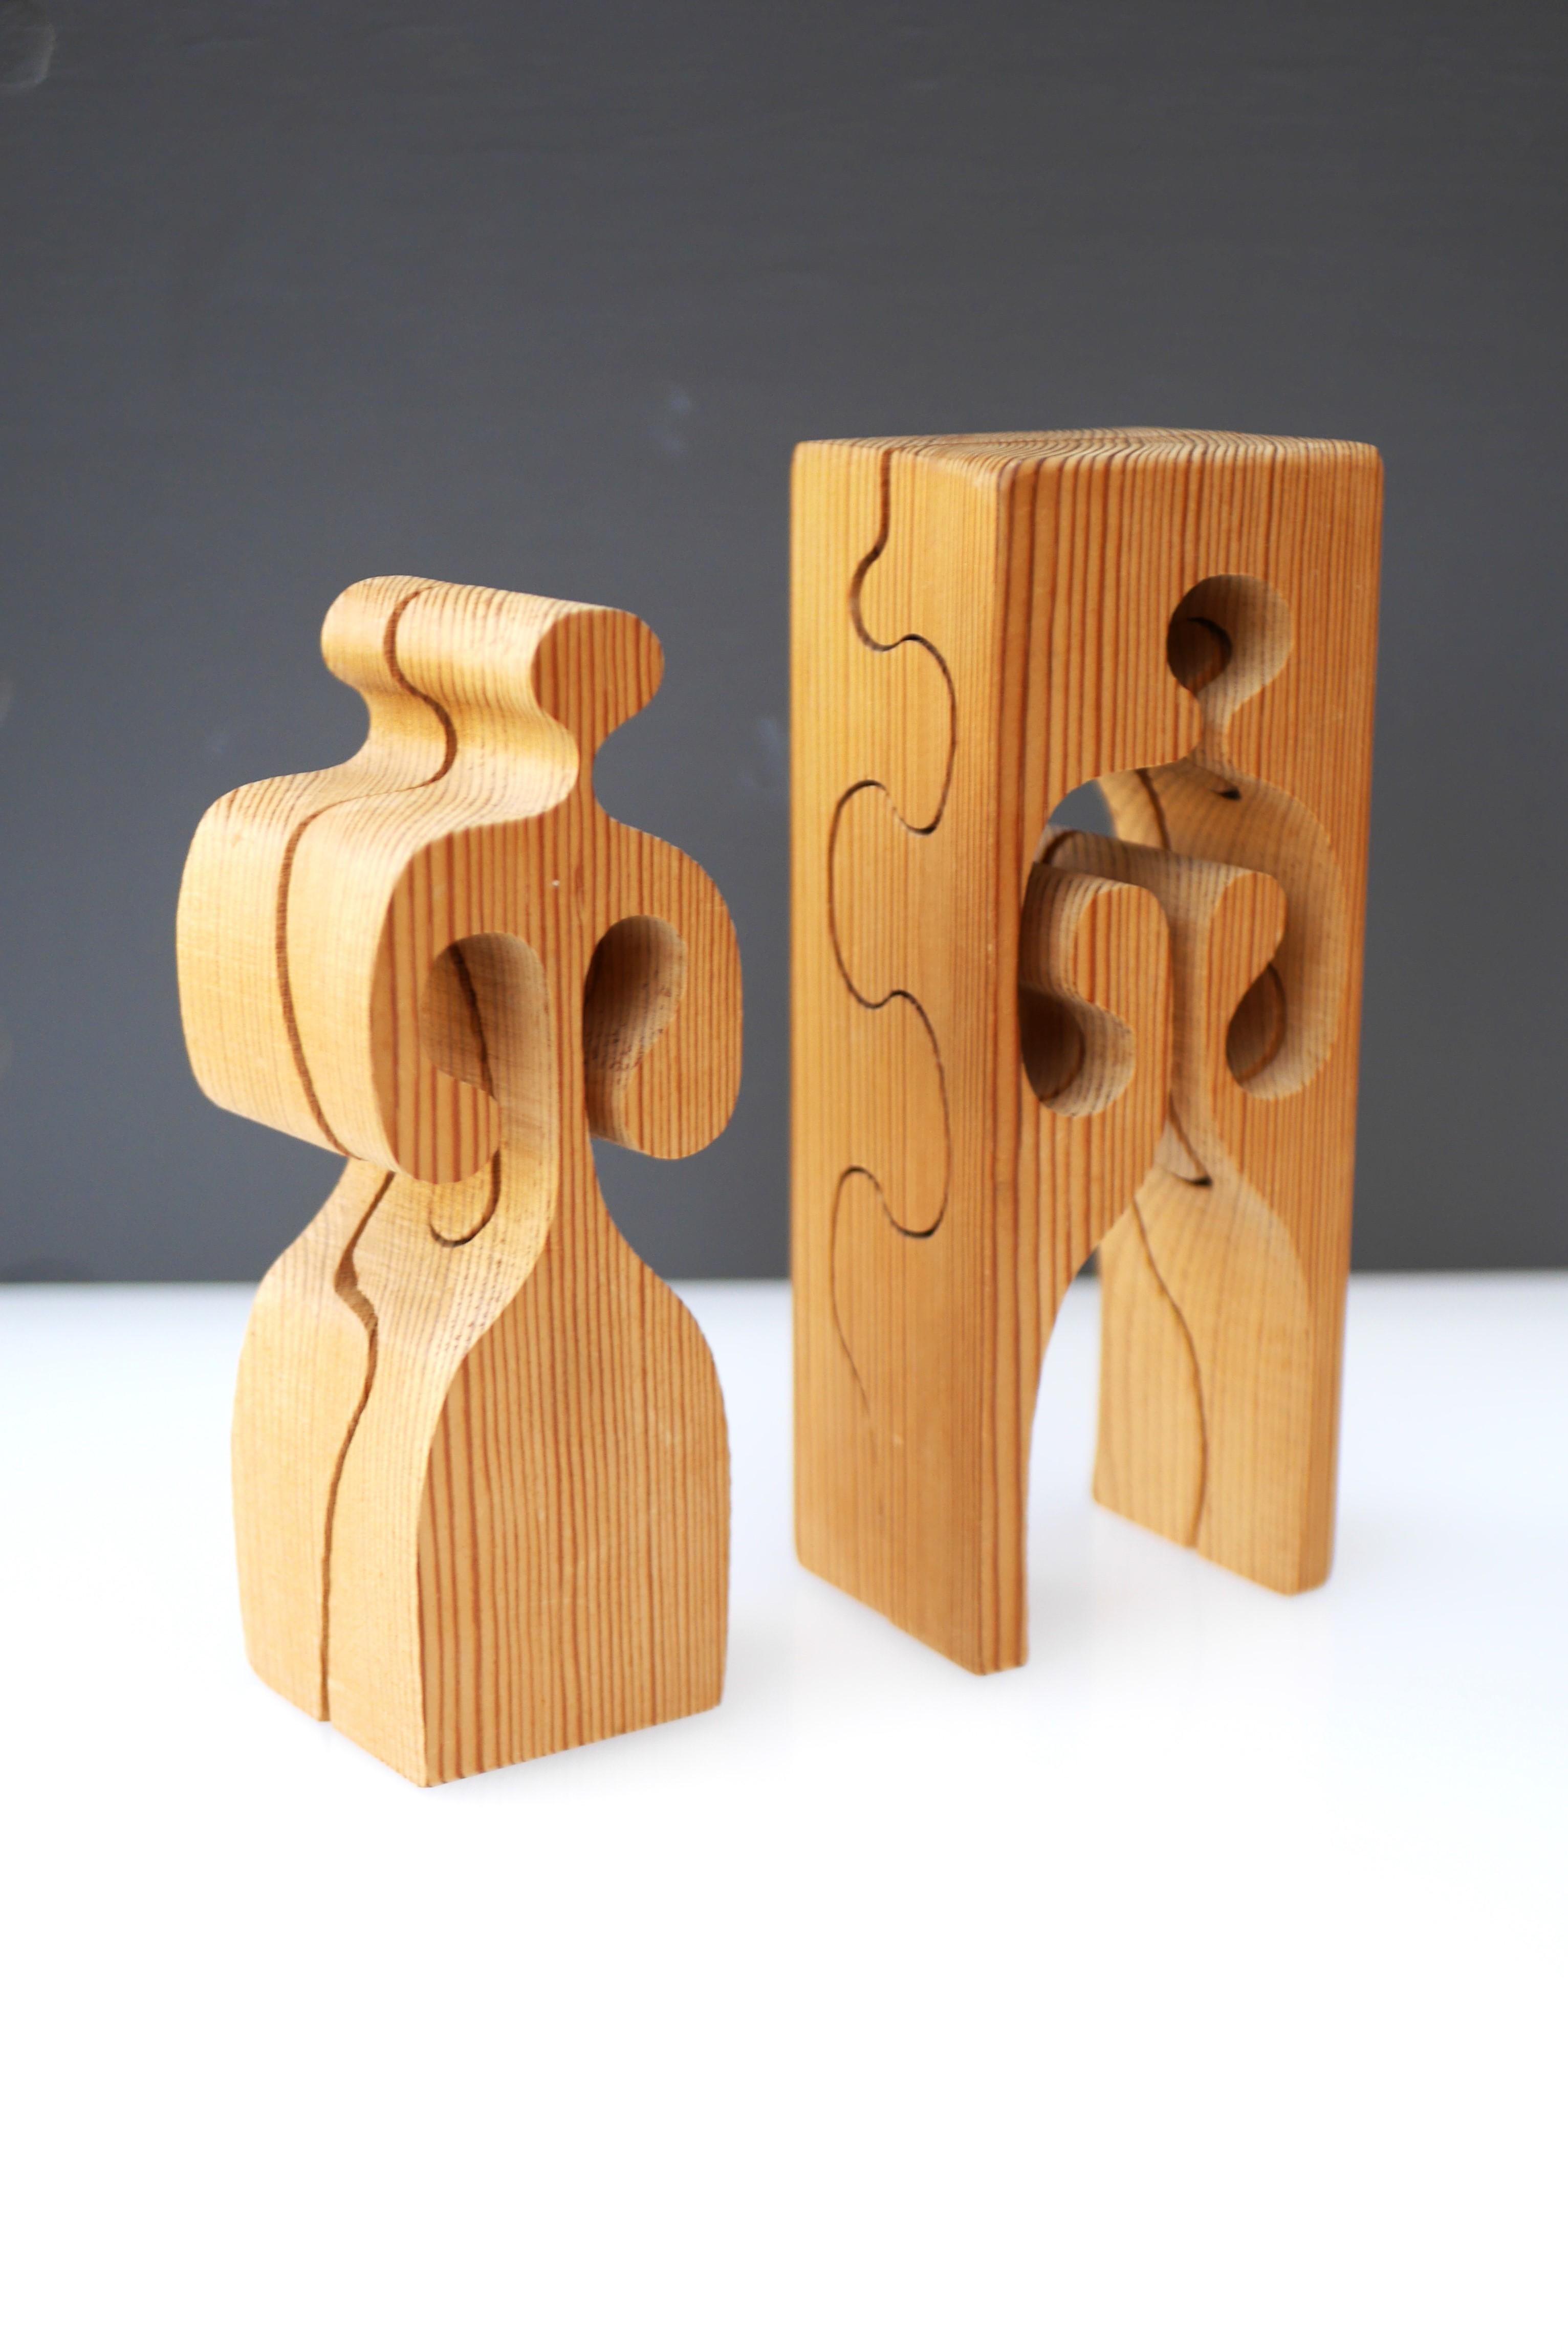 An exceptional and rare vintage Swedish Mid-century modern handmade figurative abstract puzzle/sculpture. It is made of individual 4 pieces forming a block when assembled. Many combinations are possible for display. Made by Swedish artist Gunnar